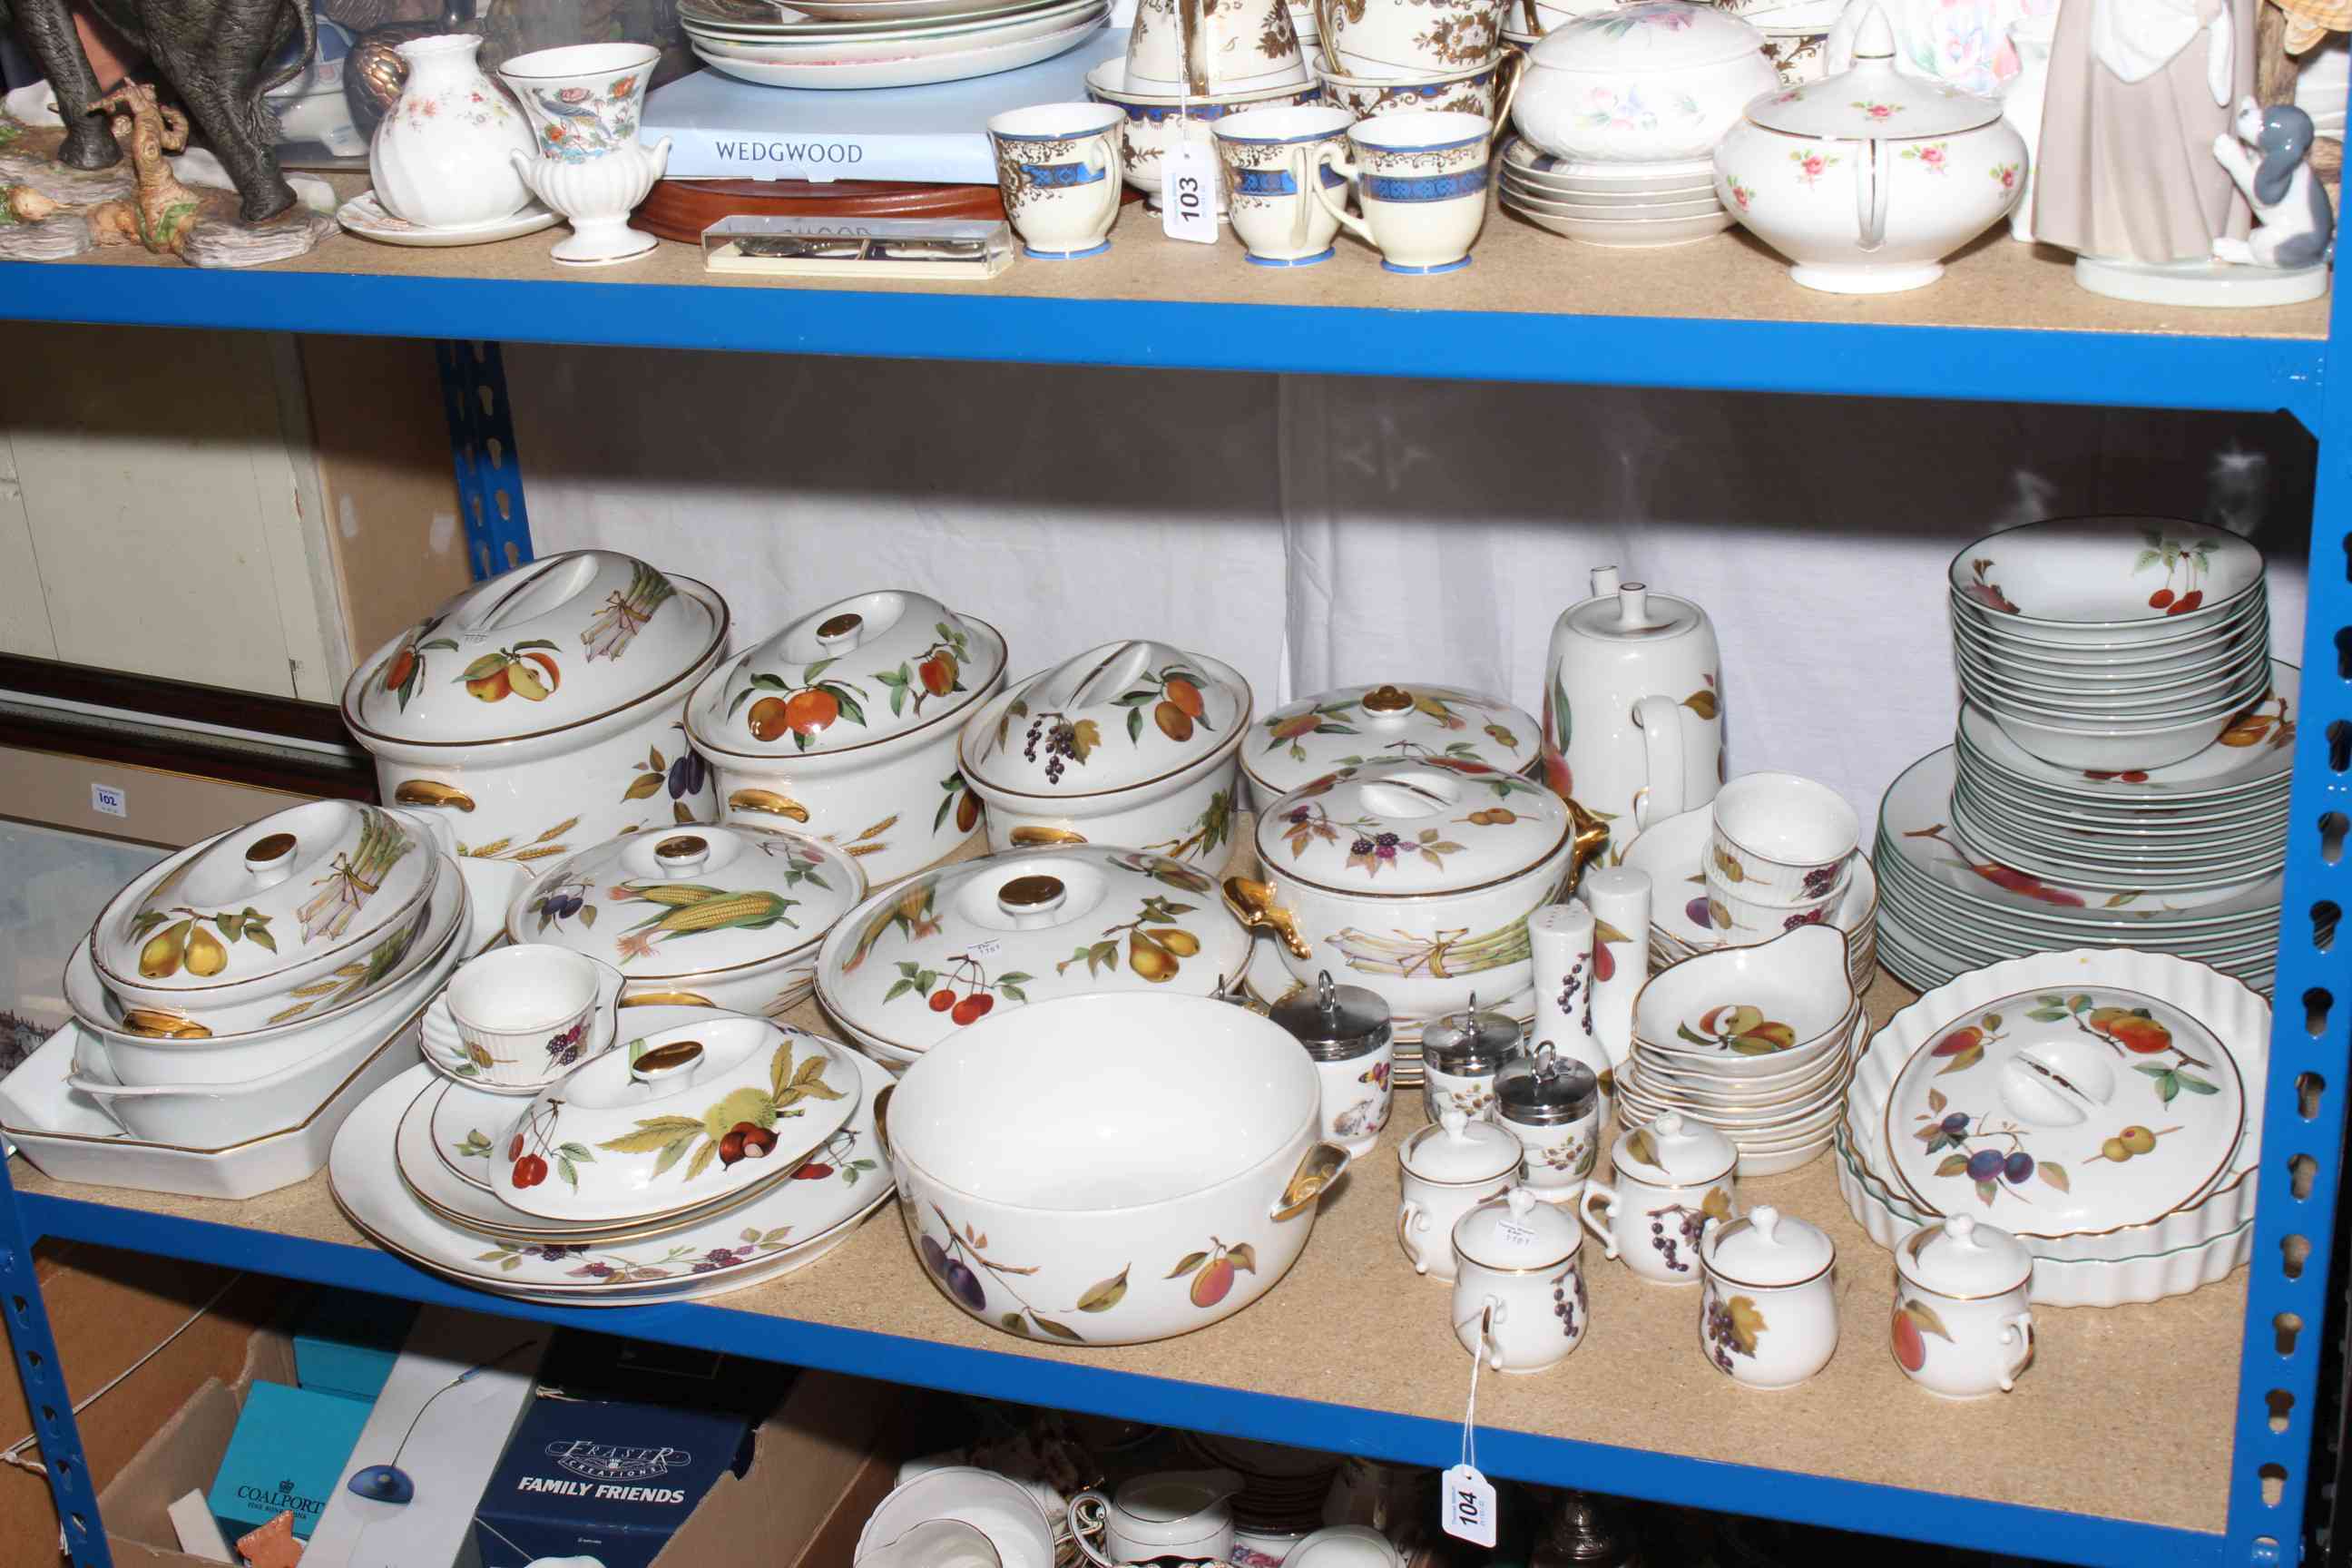 Worcester Evesham and Worcester Vale table ware including tureens, casserole dishes, plates, etc.